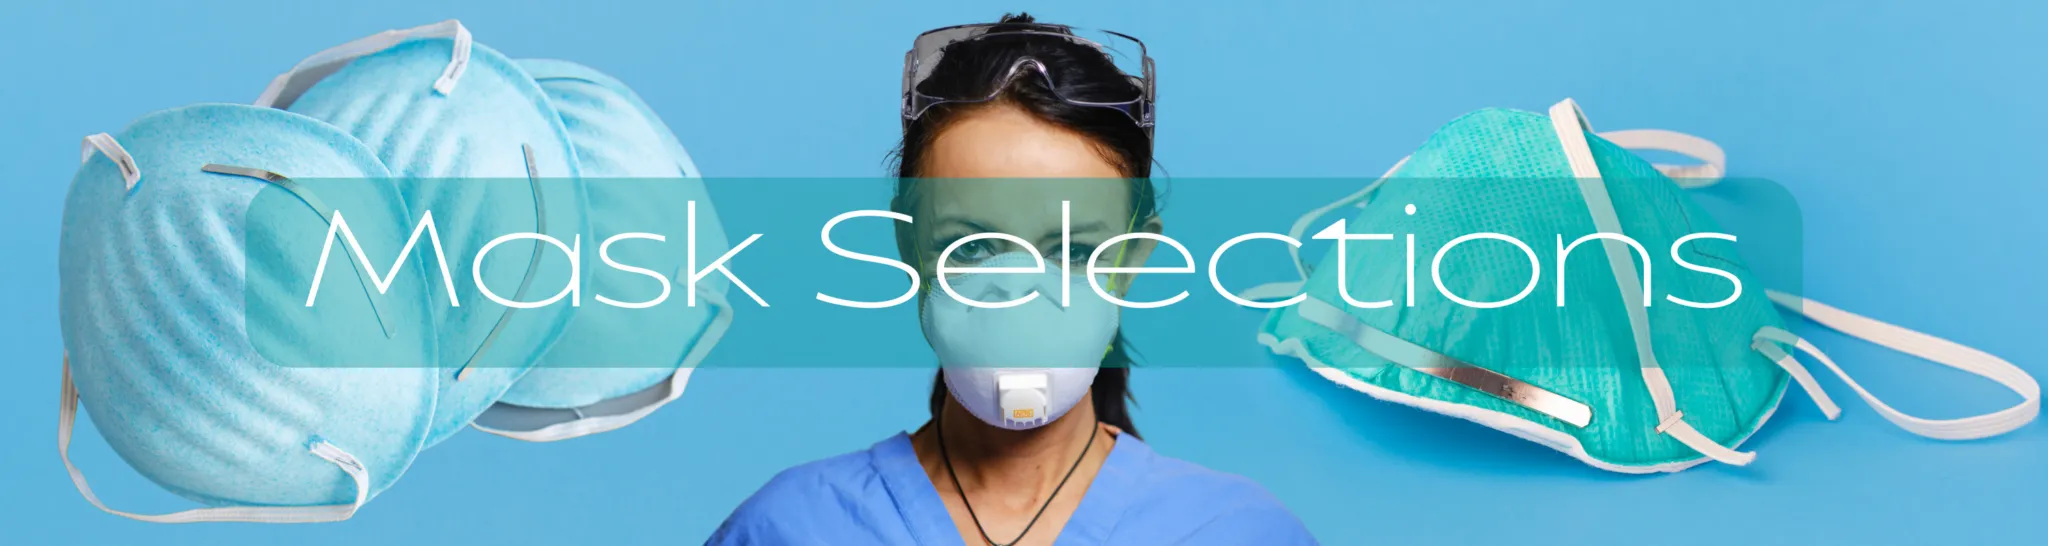 Mask-Selections-Banner-2048x546